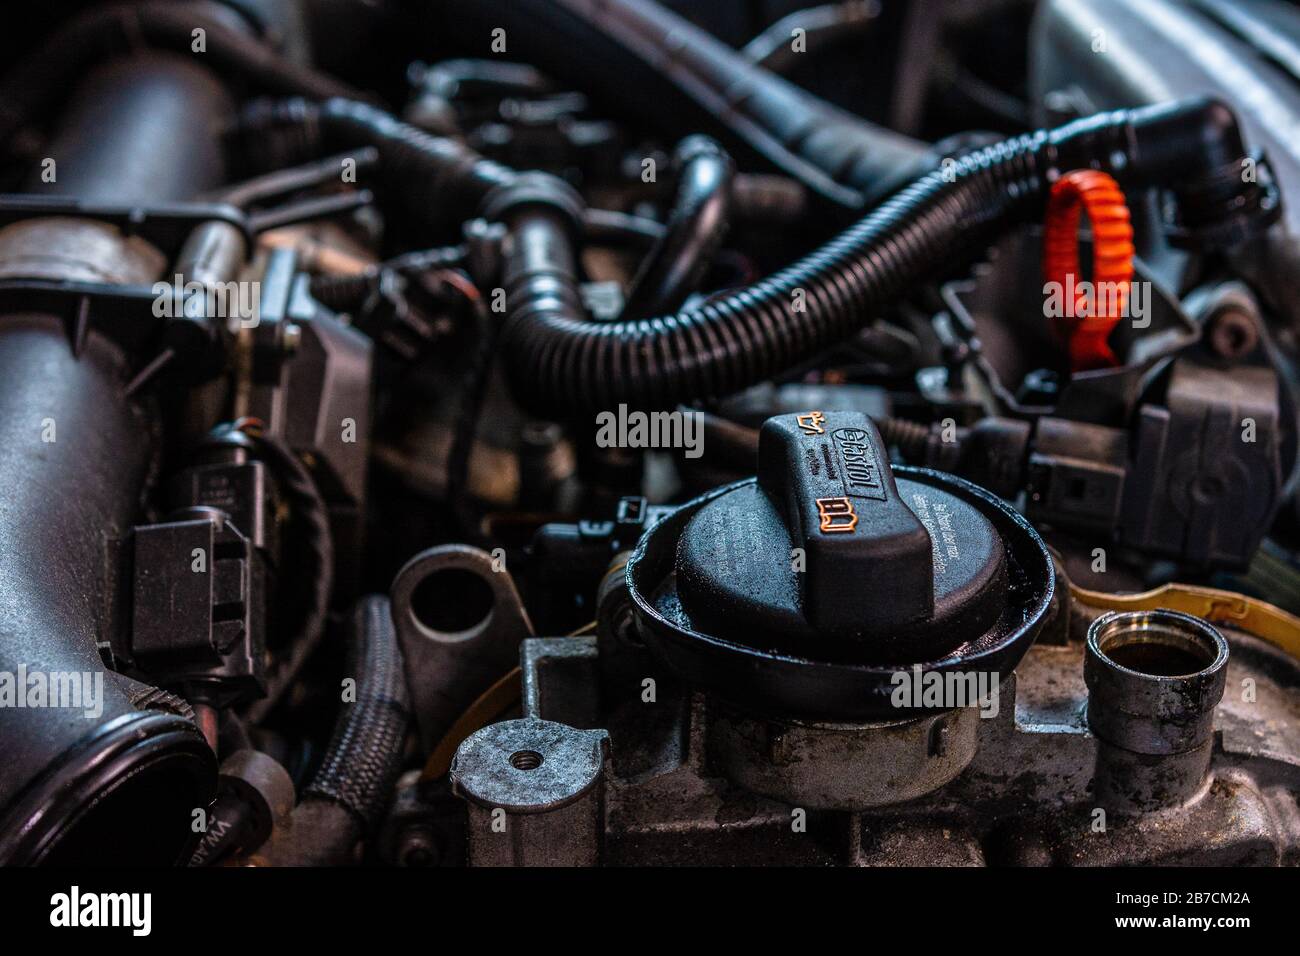 Lviv, Ukraine - March 03, 2020: closeup of car turbo engine with oil filler neck for lubrication of internal parts and turbine 2020 Stock Photo